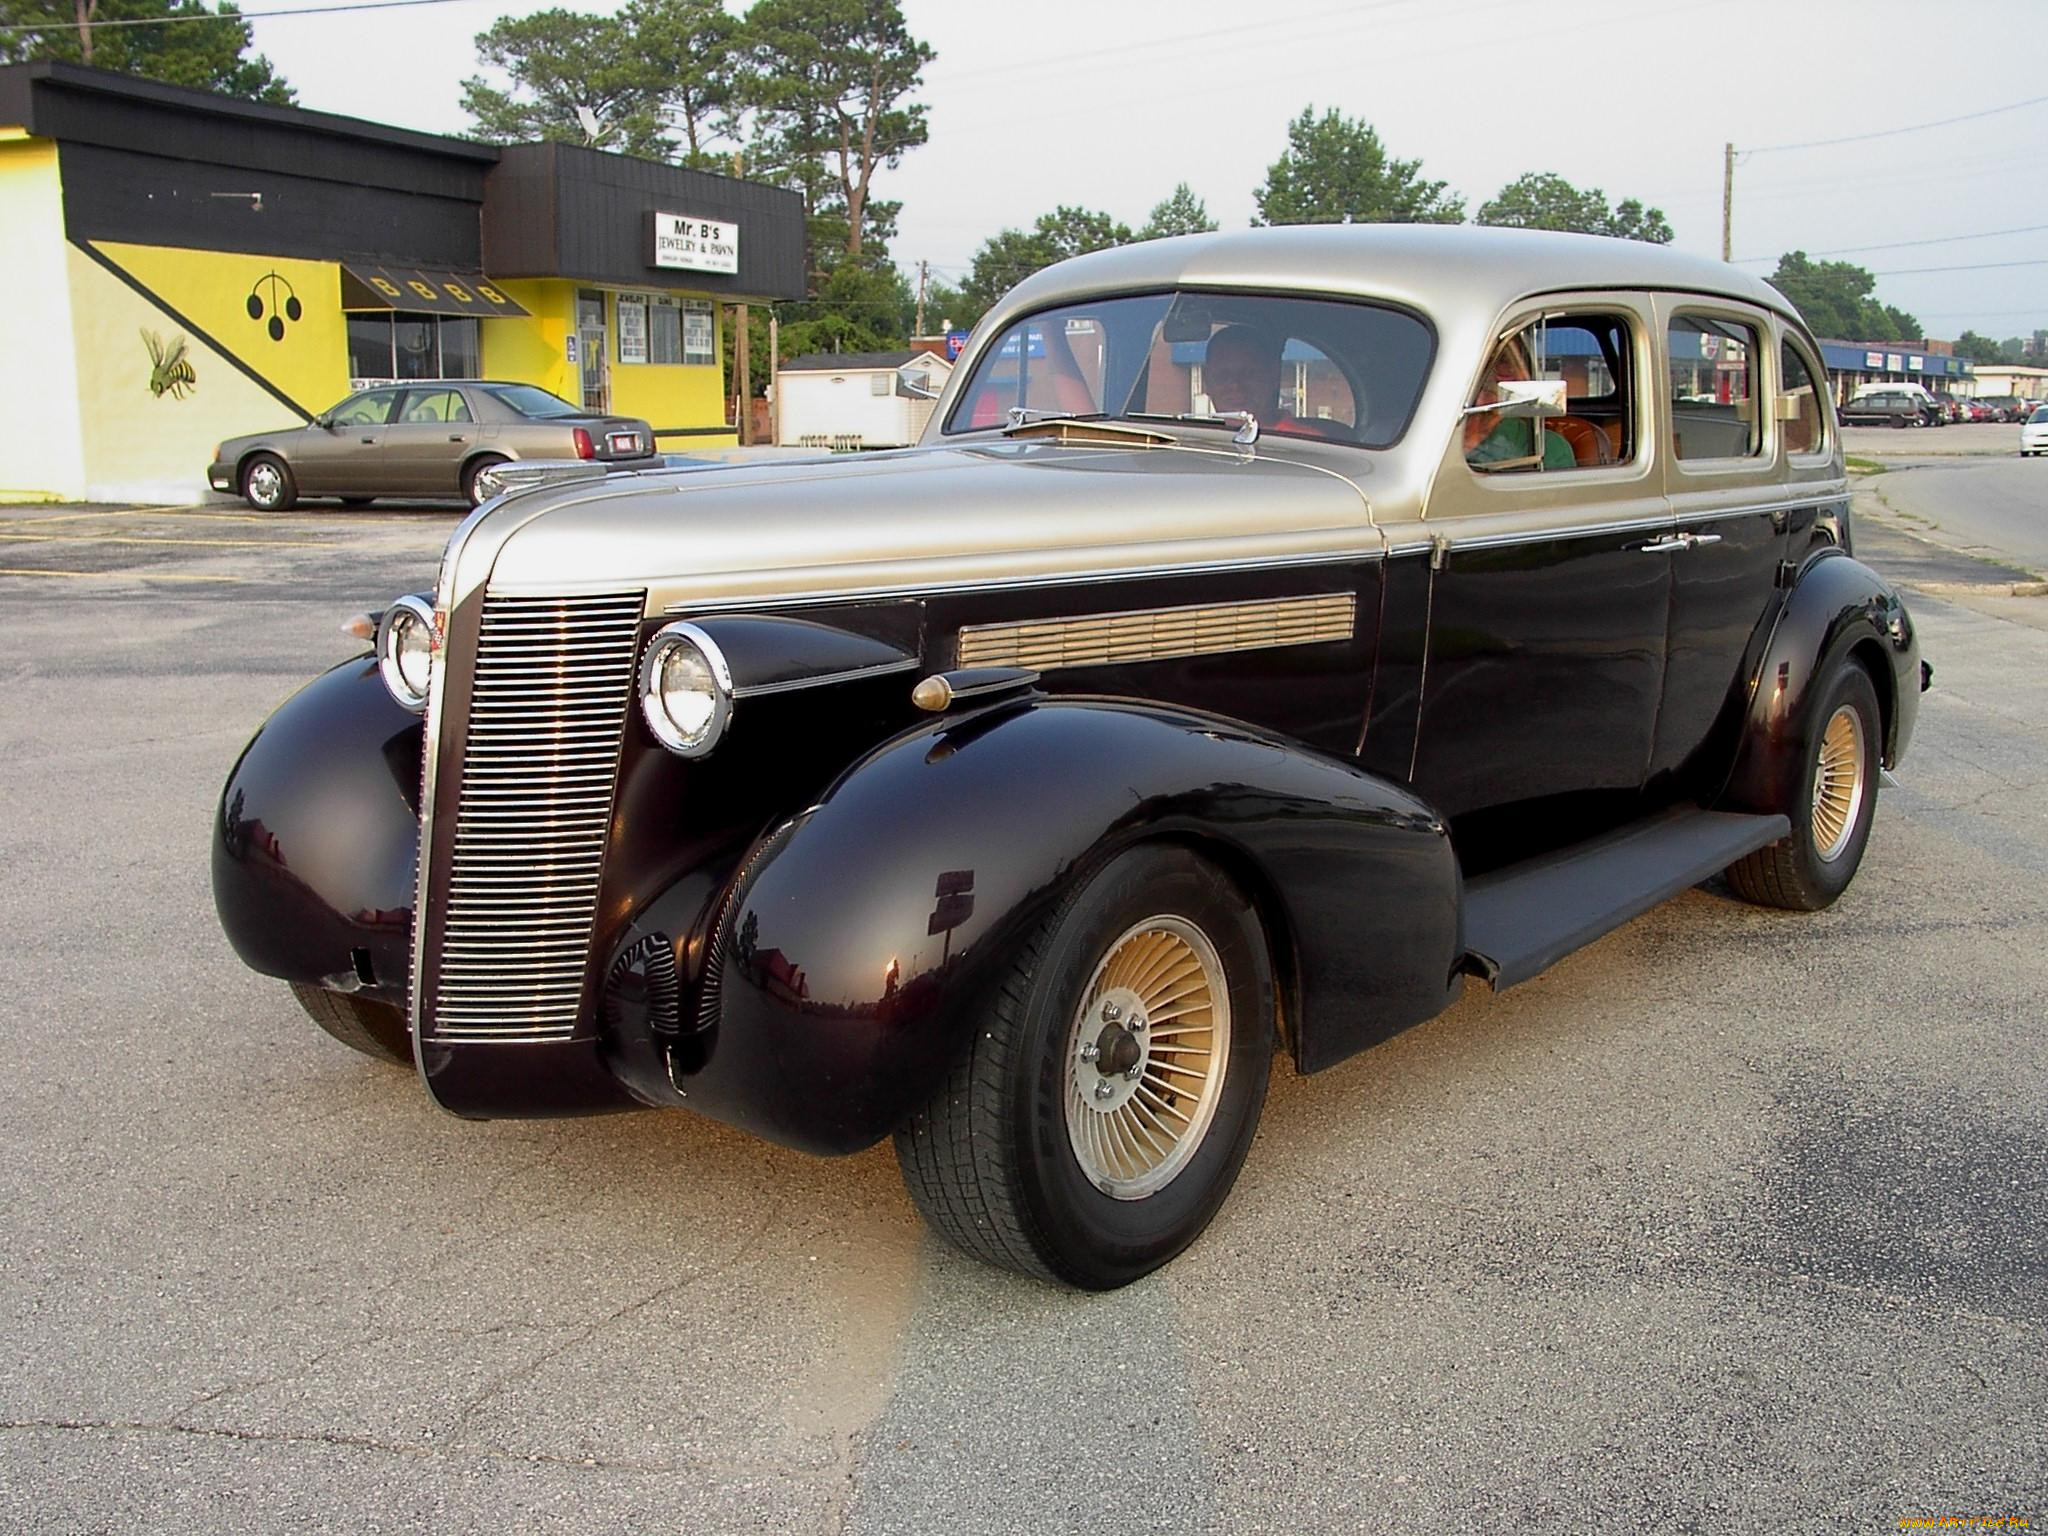 Cars from 1937